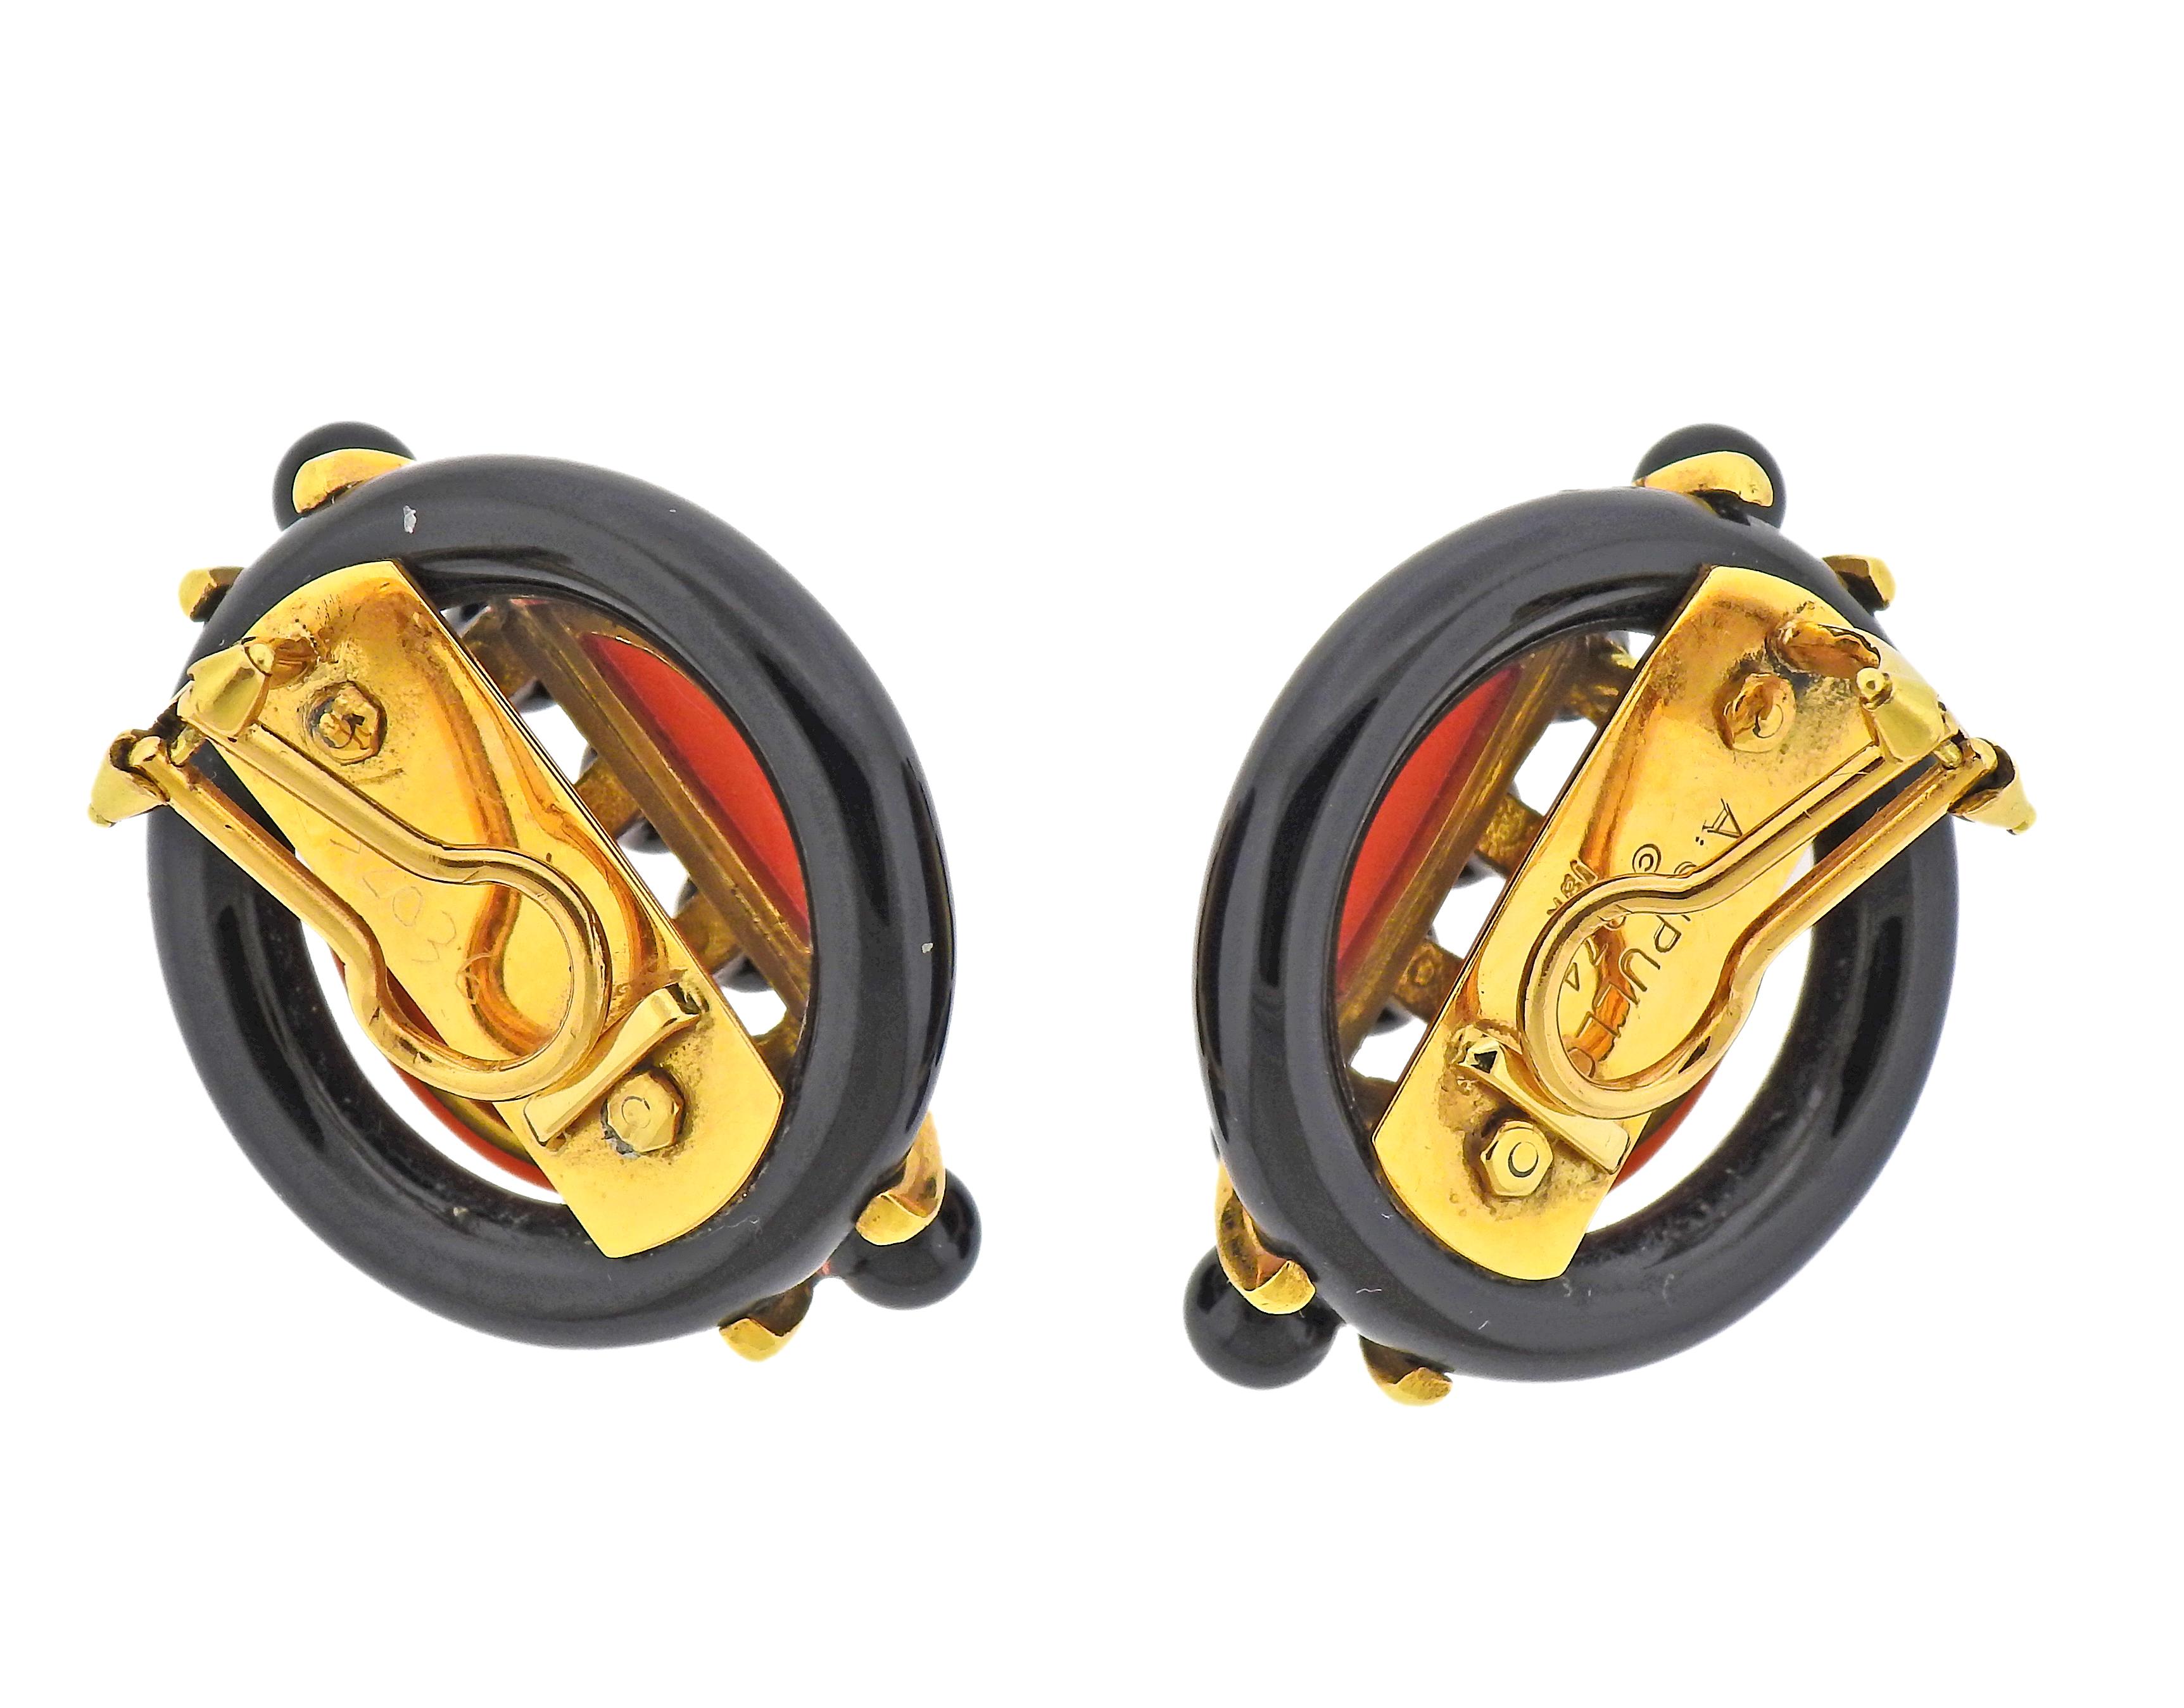 Pair of large 18k gold earrings by Aldo Cipullo, crafted in 1974, with onyx and coral. Earrings measure 35mm x 29mm. Marked: A.Cipullo, 18k, 1974, 32036. Weight - 35.4 grams.